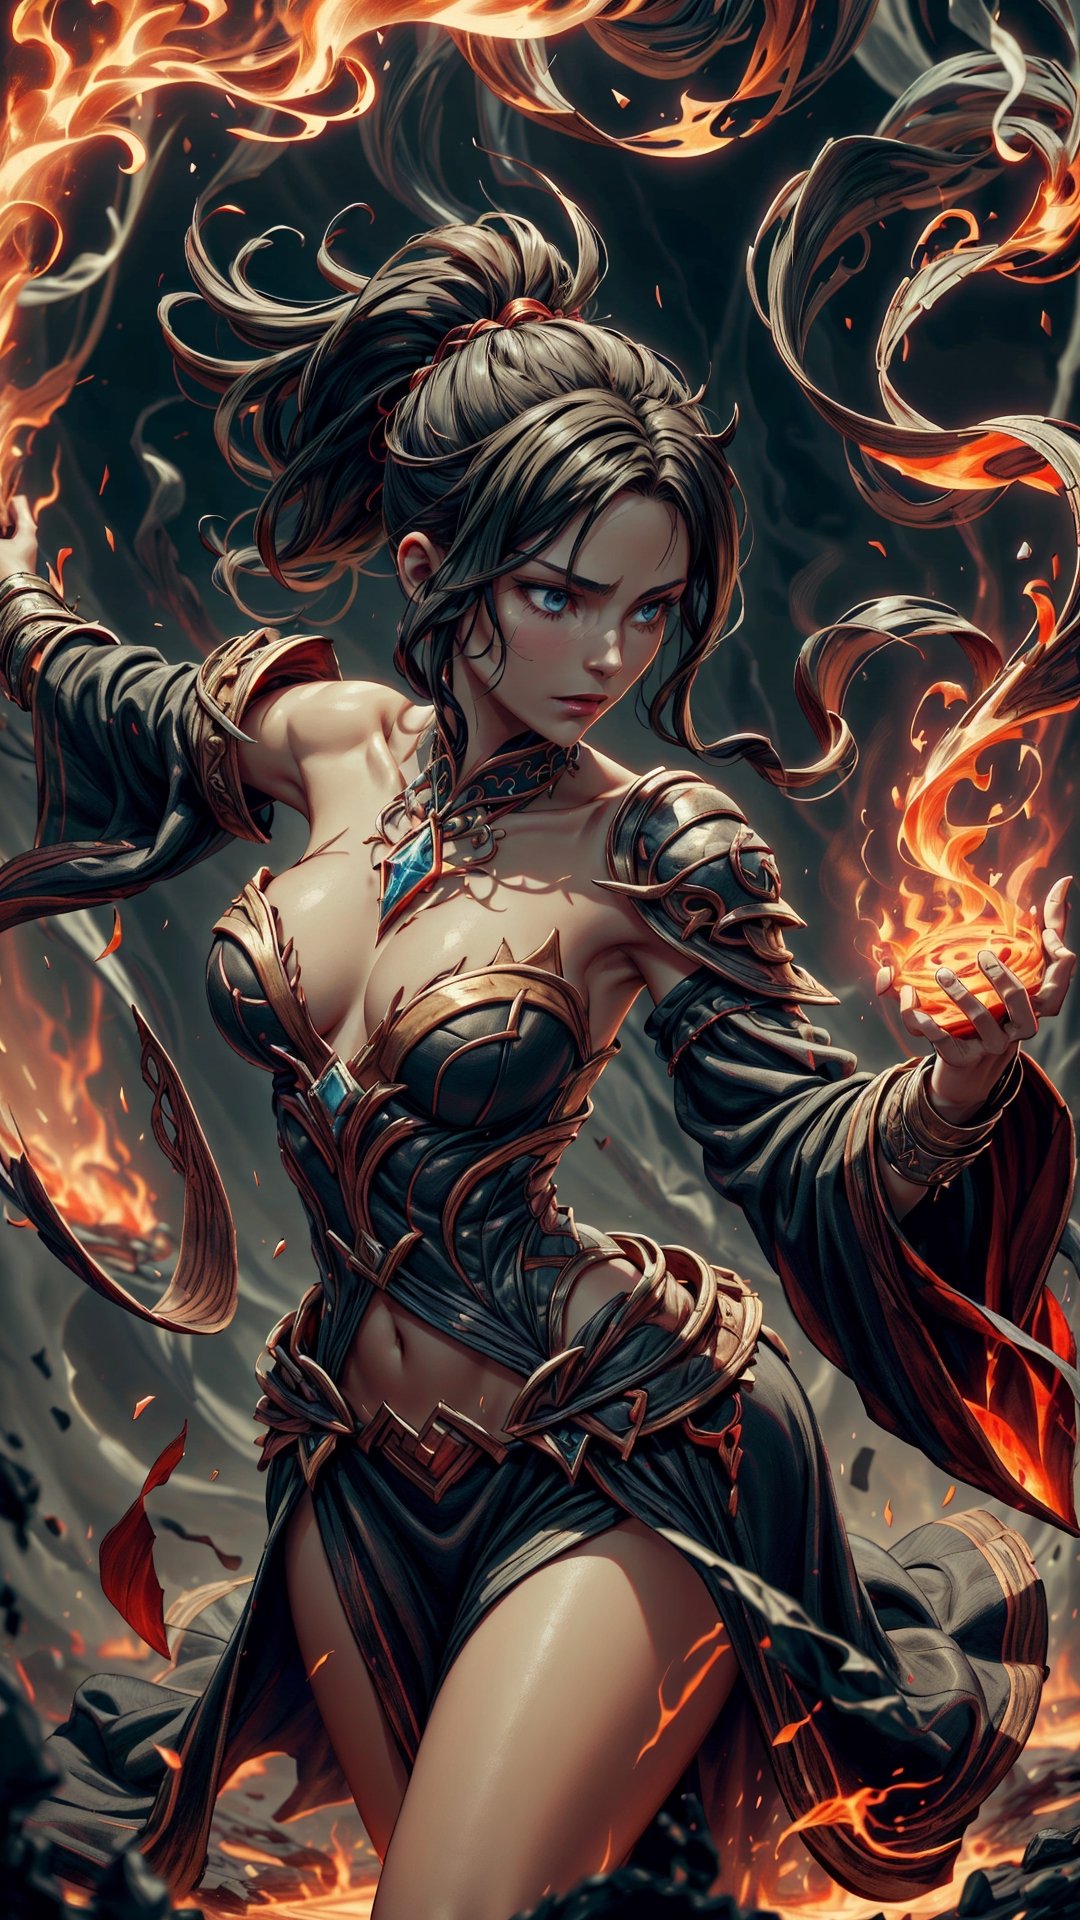 (4k), (masterpiece), (best quality),(extremely intricate), (realistic), (sharp focus), (cinematic lighting), (extremely detailed), 

The young girl flame sorceress stood in the center of the summoning circle, her hands raised and her eyes glowing with power. She was clad in a flowing red dress and her long, black hair was wild and free. The air around her was thick with the smell of smoke and sulfur.

She began to chant the ancient summoning spell, her voice rising and falling in a melodic rhythm. The runes carved into the summoning circle began to glow with a bright light. The light grew brighter and brighter, until it was almost blinding.

Then, there was a flash of light and a deafening roar. The summoning circle was engulfed in a whirlwind of flames, and the air around the sorceress was filled with static electricity.

The flames died down and the whirlwind vanished. In the center of the summoning circle stood a towering figure, clad in black armor and wielding a flaming sword.

The sorceress bowed her head. "My lord," she said. "I have summoned you."

The figure nodded. "Your summons has been answered," he said in a deep, booming voice. "What is your request?"

The sorceress raised her head and looked him in the eye. "I need your help to defeat the enemy," she said. "They are too powerful for me to defeat alone."

The figure smiled. "I will help you," he said. "But first, you must prove yourself to me. You must show me that you are worthy of my aid."

The sorceress nodded. "I understand," she said. "What must I do?"

The figure raised his sword. "You must fight me," he said. "And you must defeat me."

The sorceress took a deep breath. "I am ready," she said.

The figure charged at the sorceress, his sword raised. She raised her own sword to meet him, and the two of them clashed in the center of the summoning circle.

They fought for what seemed like hours, neither one giving an inch. But in the end, the sorceress emerged victorious. She had defeated the towering figure in single combat.

The figure knelt before her. "You have proven yourself worthy," he said. "I will now aid you in your quest."

The sorceress smiled. "Thank you," she said. "With your help, we will defeat the enemy."

Together, the sorceress and the figure left the summoning circle and stepped out into the world, ready to face their enemies.

,emb3r4rmor,MagmaTech,embers,(FlamePrincess),(ponytail),Circle,demonictech